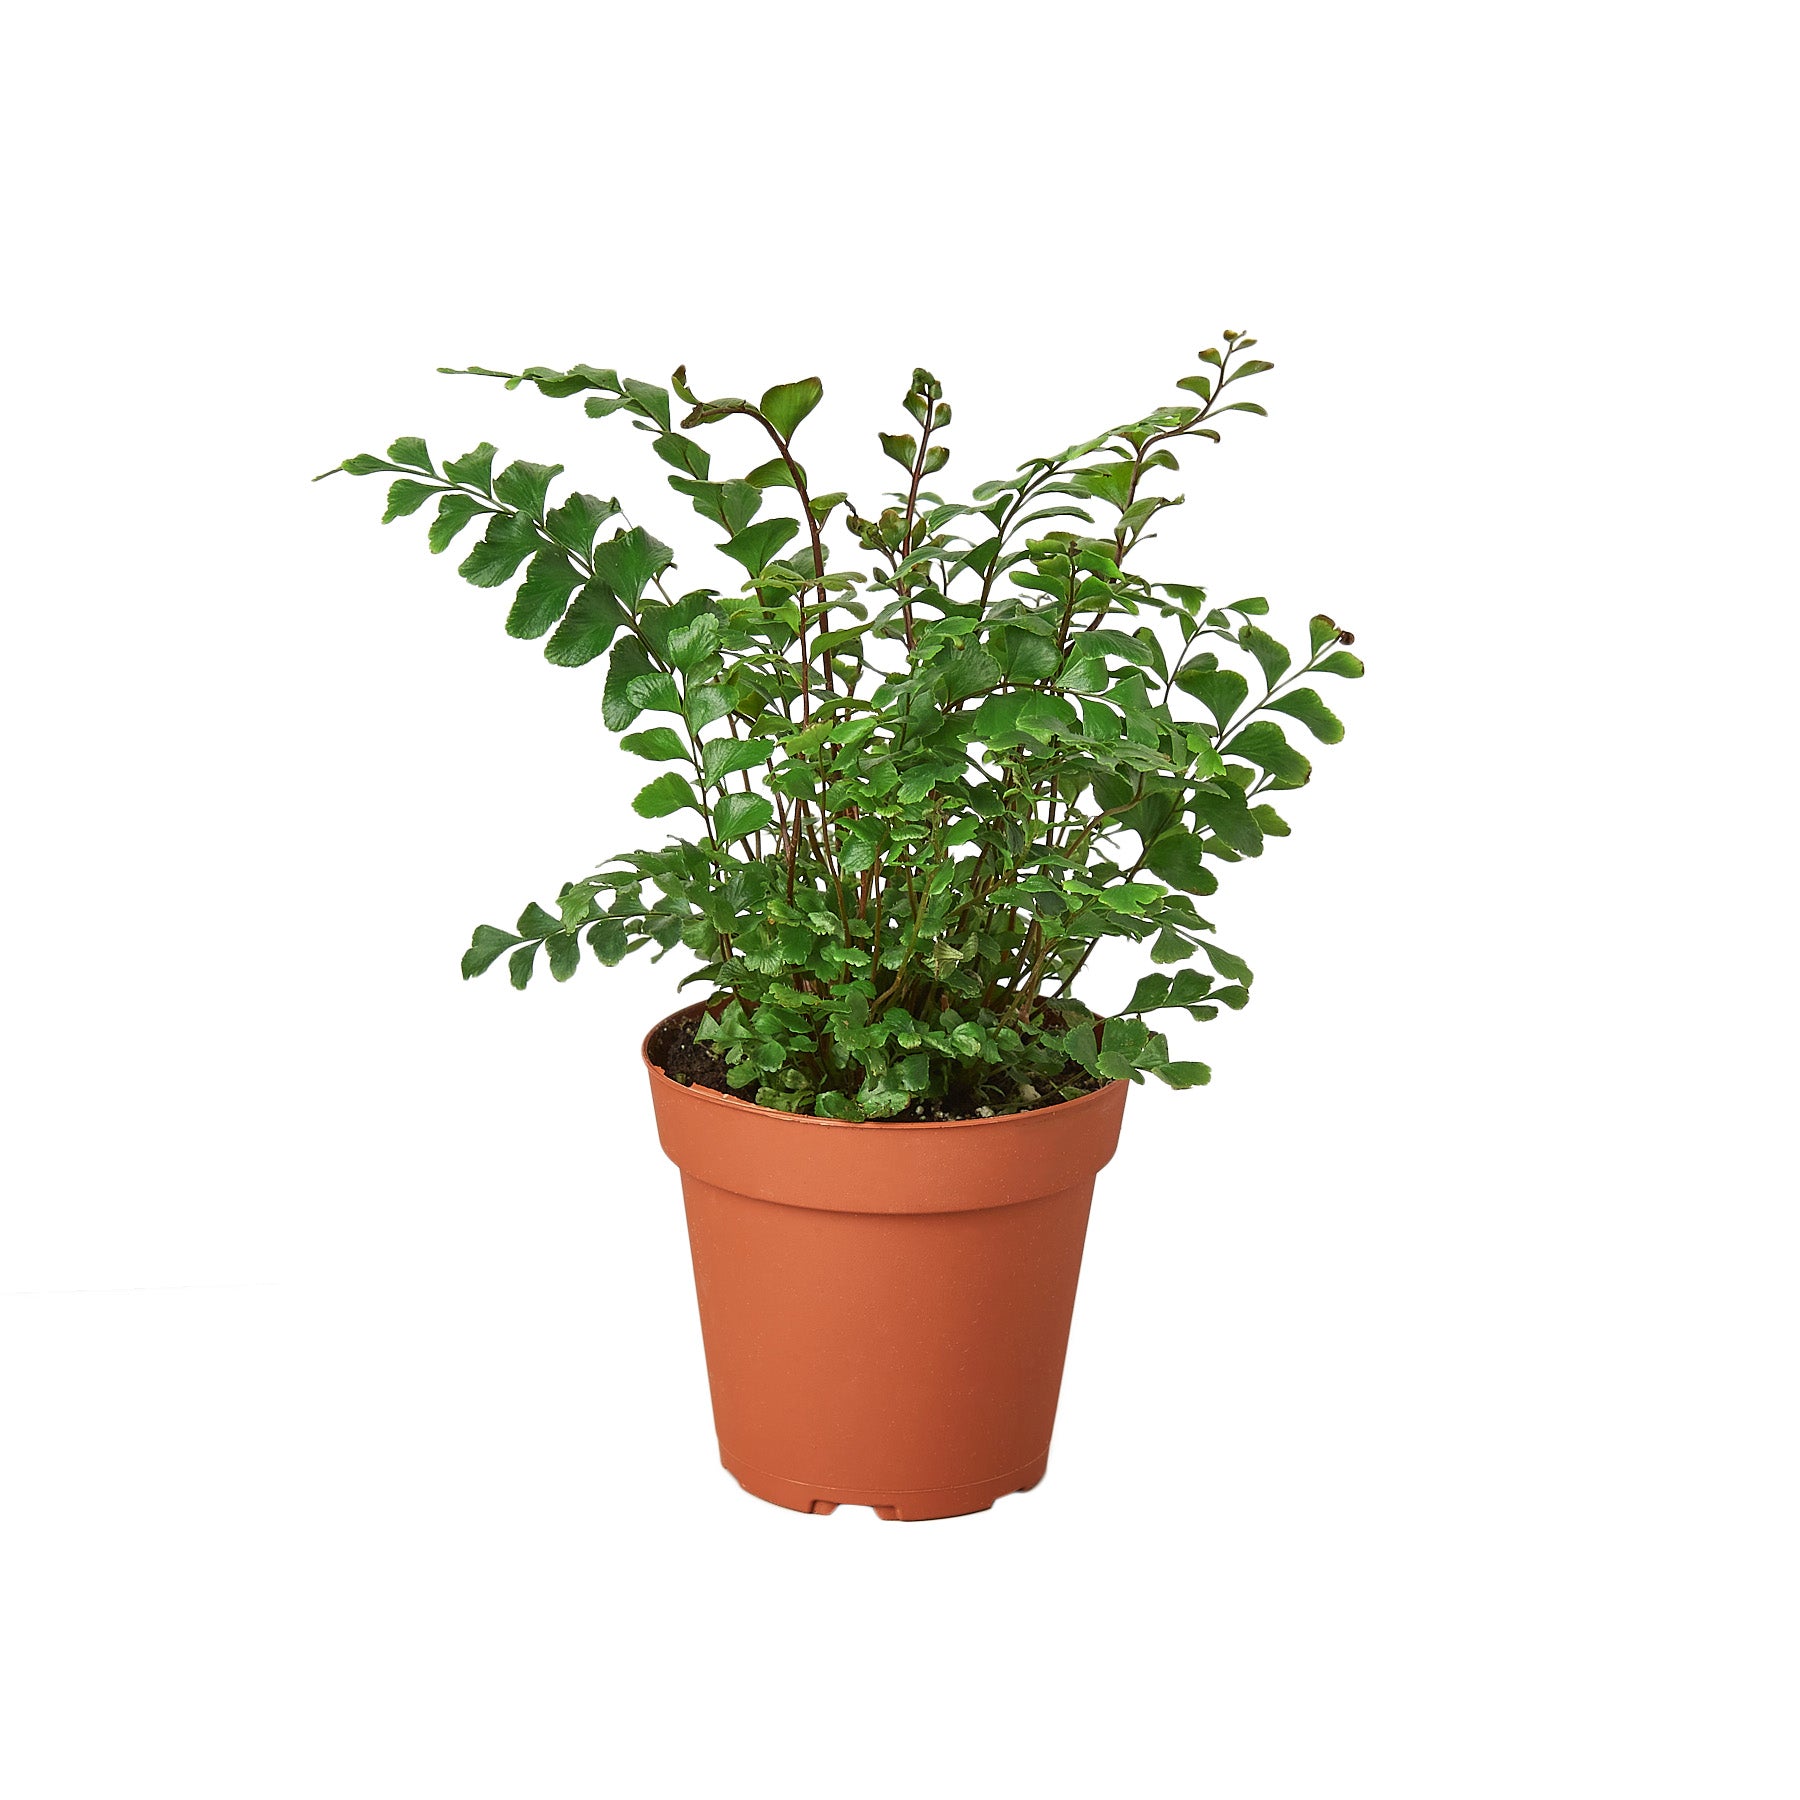 A small plant in a pot on a white background, available at the best garden nursery near me.